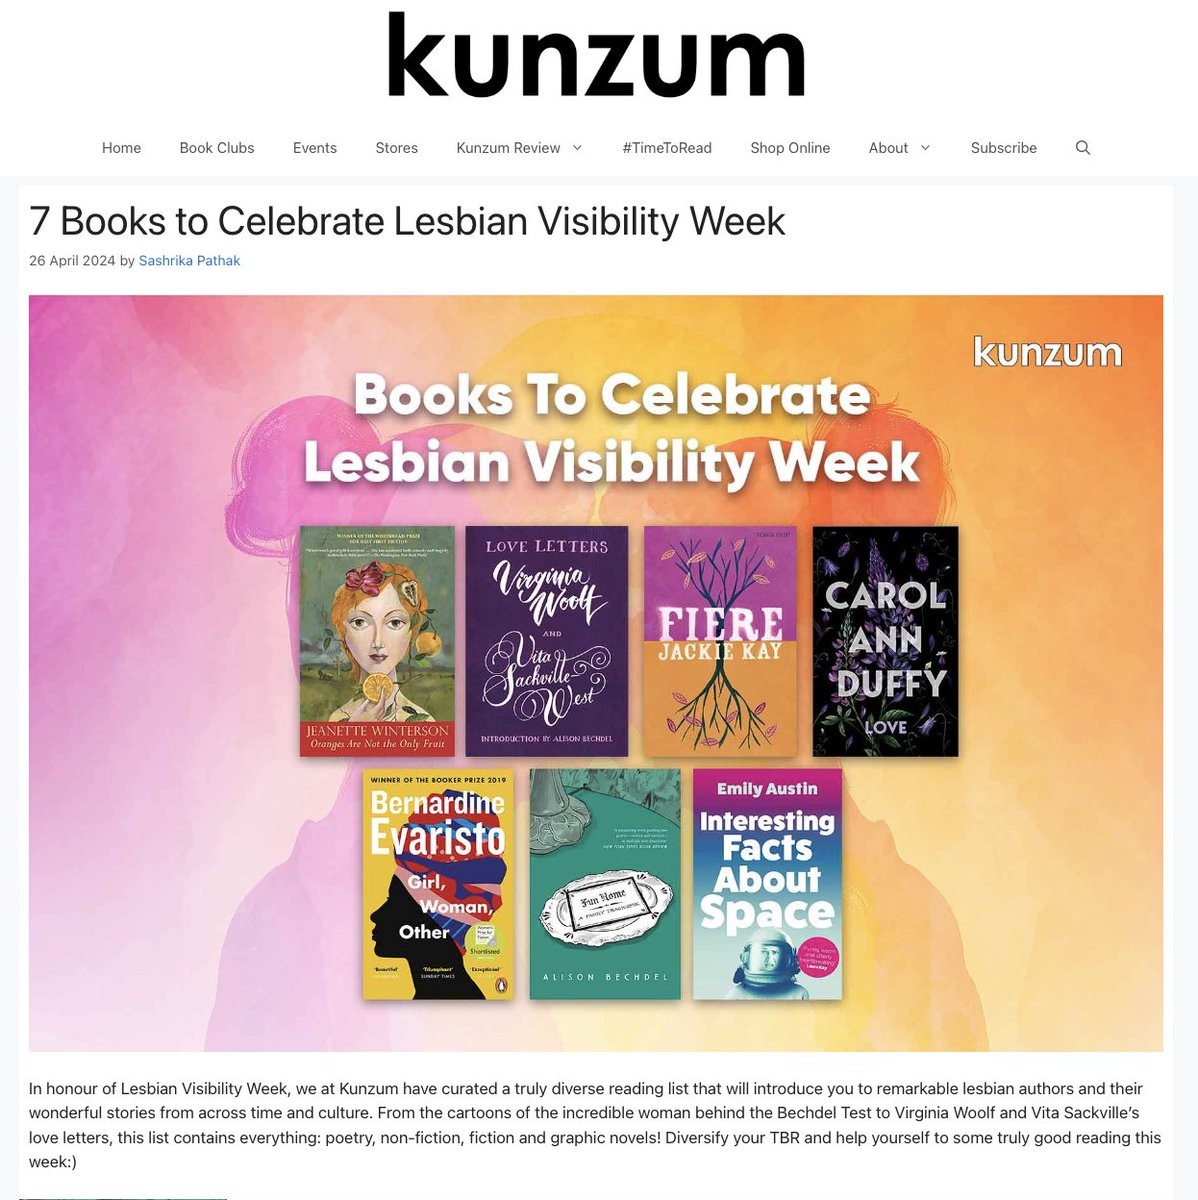 'In honour of Lesbian Visibility Week, we at Kunzum have curated a truly diverse reading list that will introduce you to remarkable lesbian authors and their wonderful stories.' ✨ Read the full blog here - bit.ly/3UihWa7 #LesbianVisibiltyWeek #LGBTQ #KunzumBlog